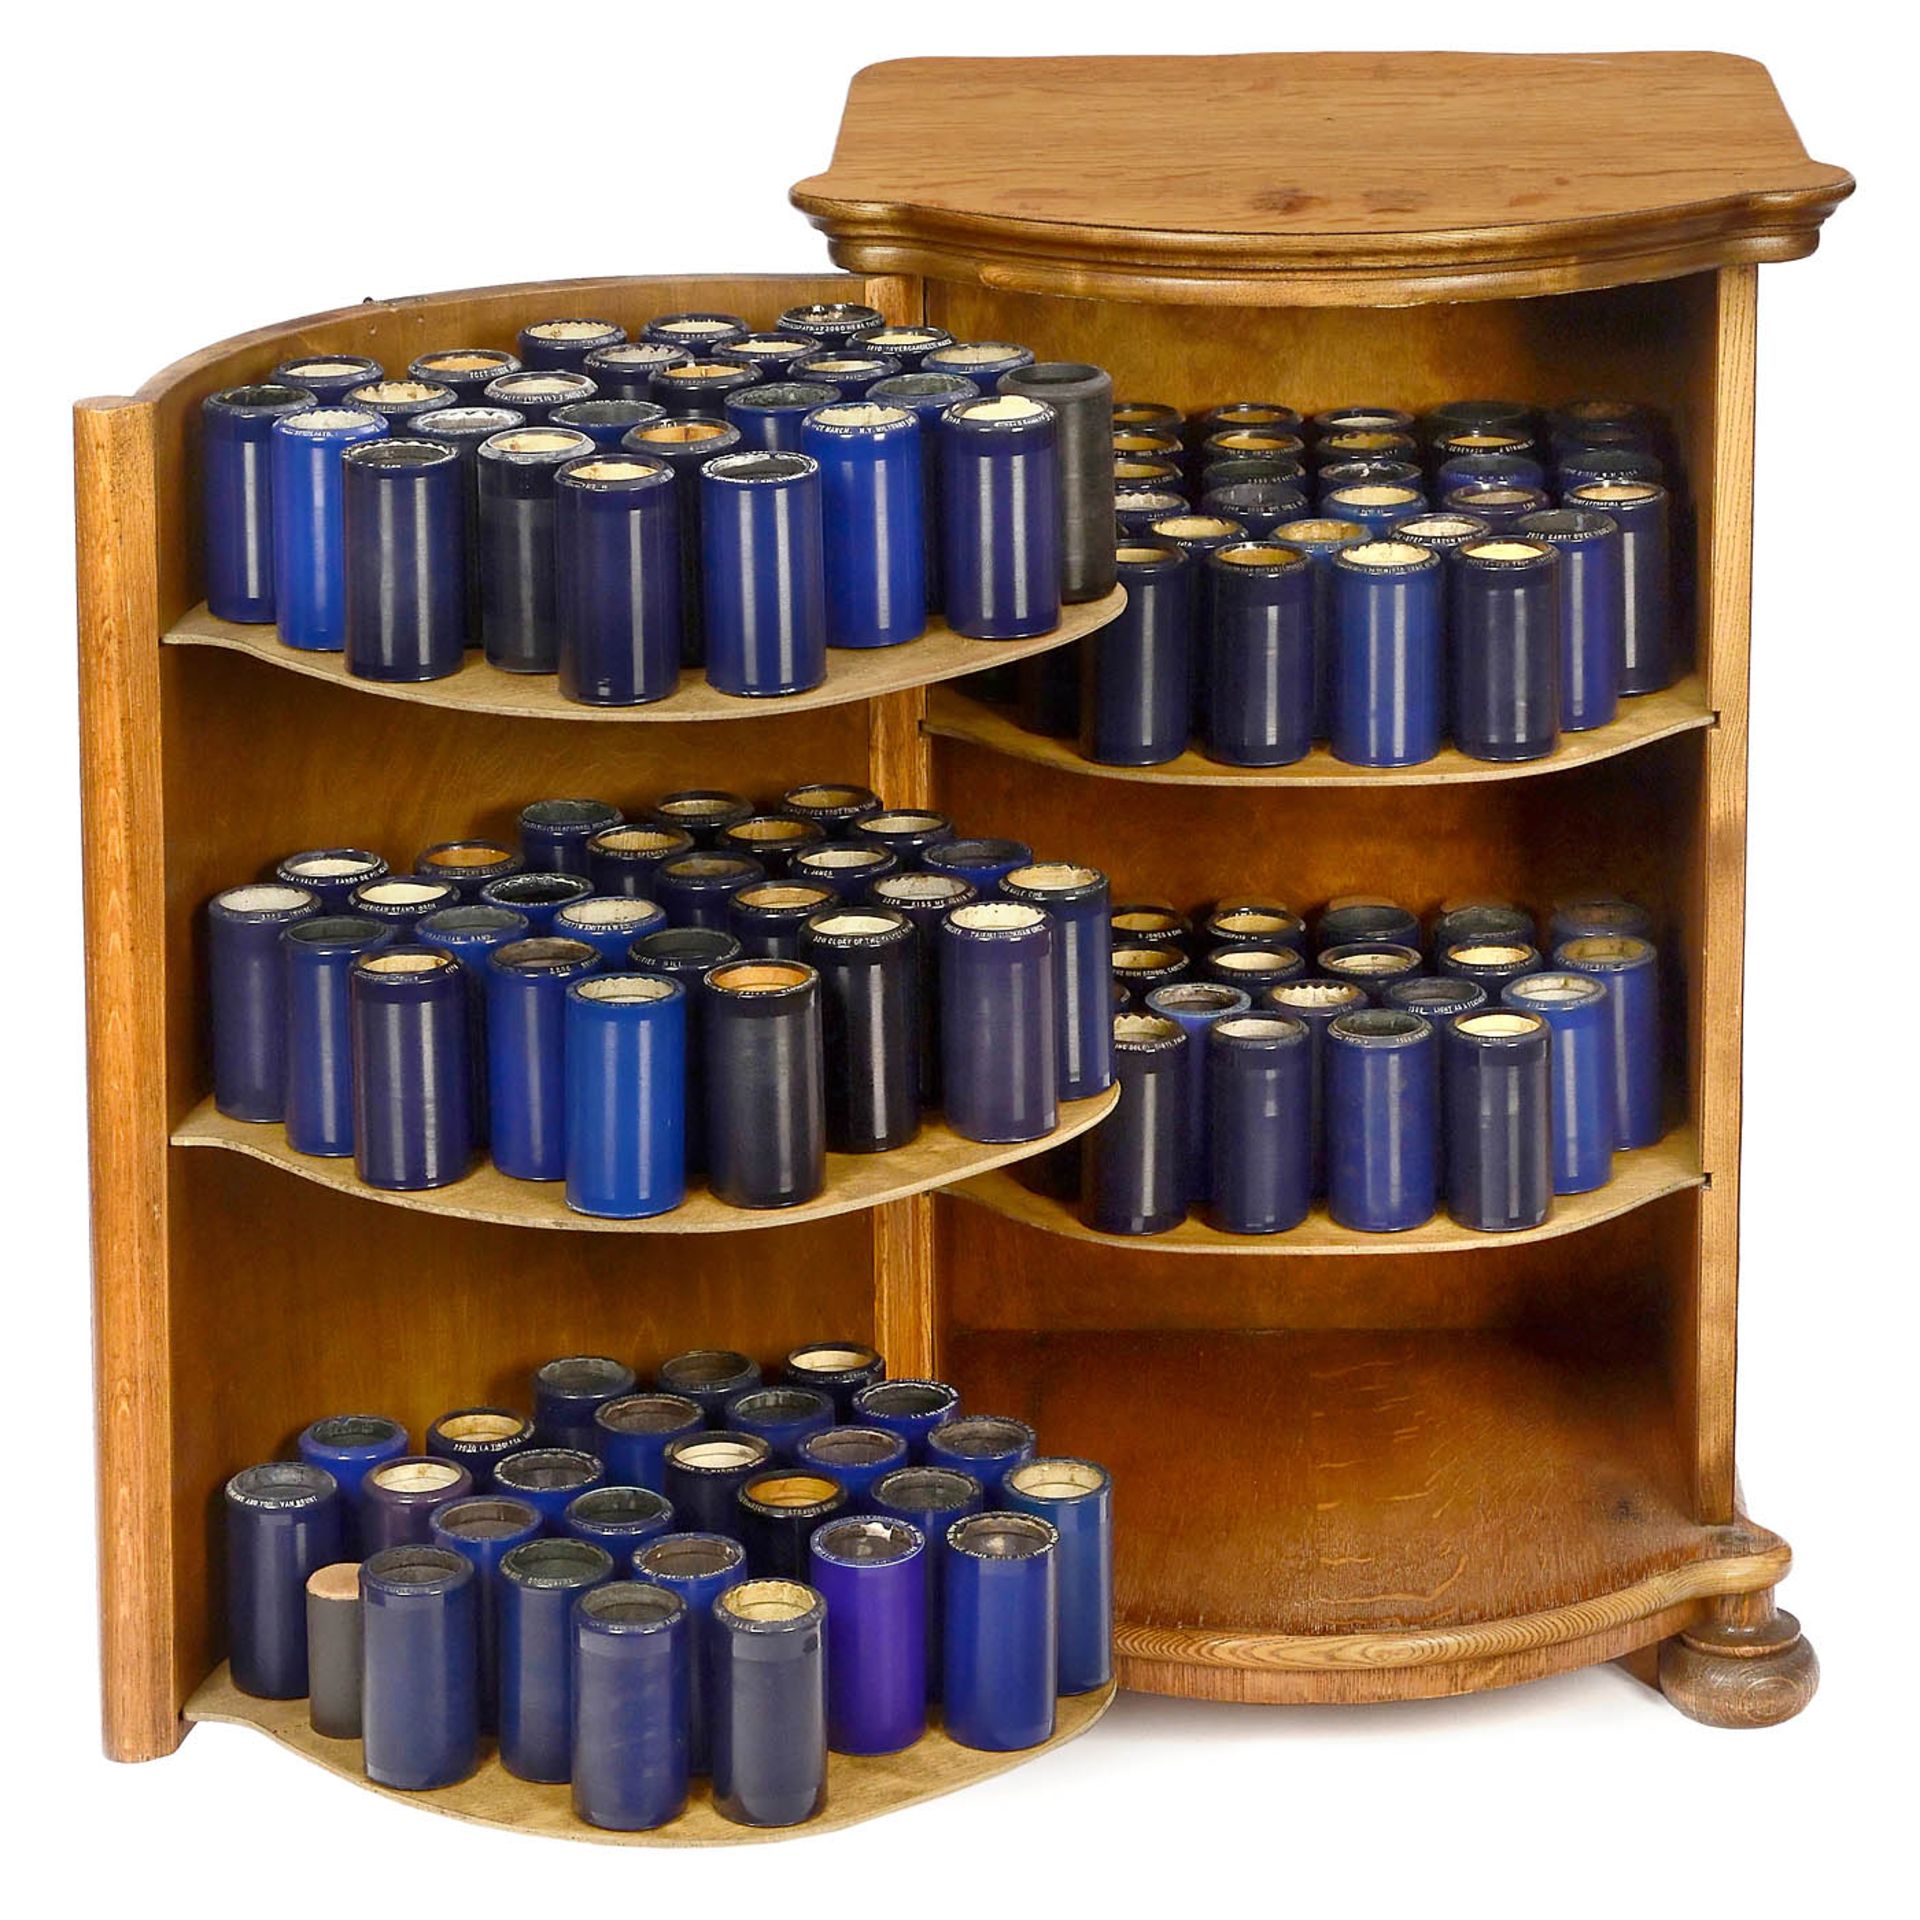 Herzog Bowfront Cylinder Cabinet and 122 Blue Amberol Cylinders, c. 1910